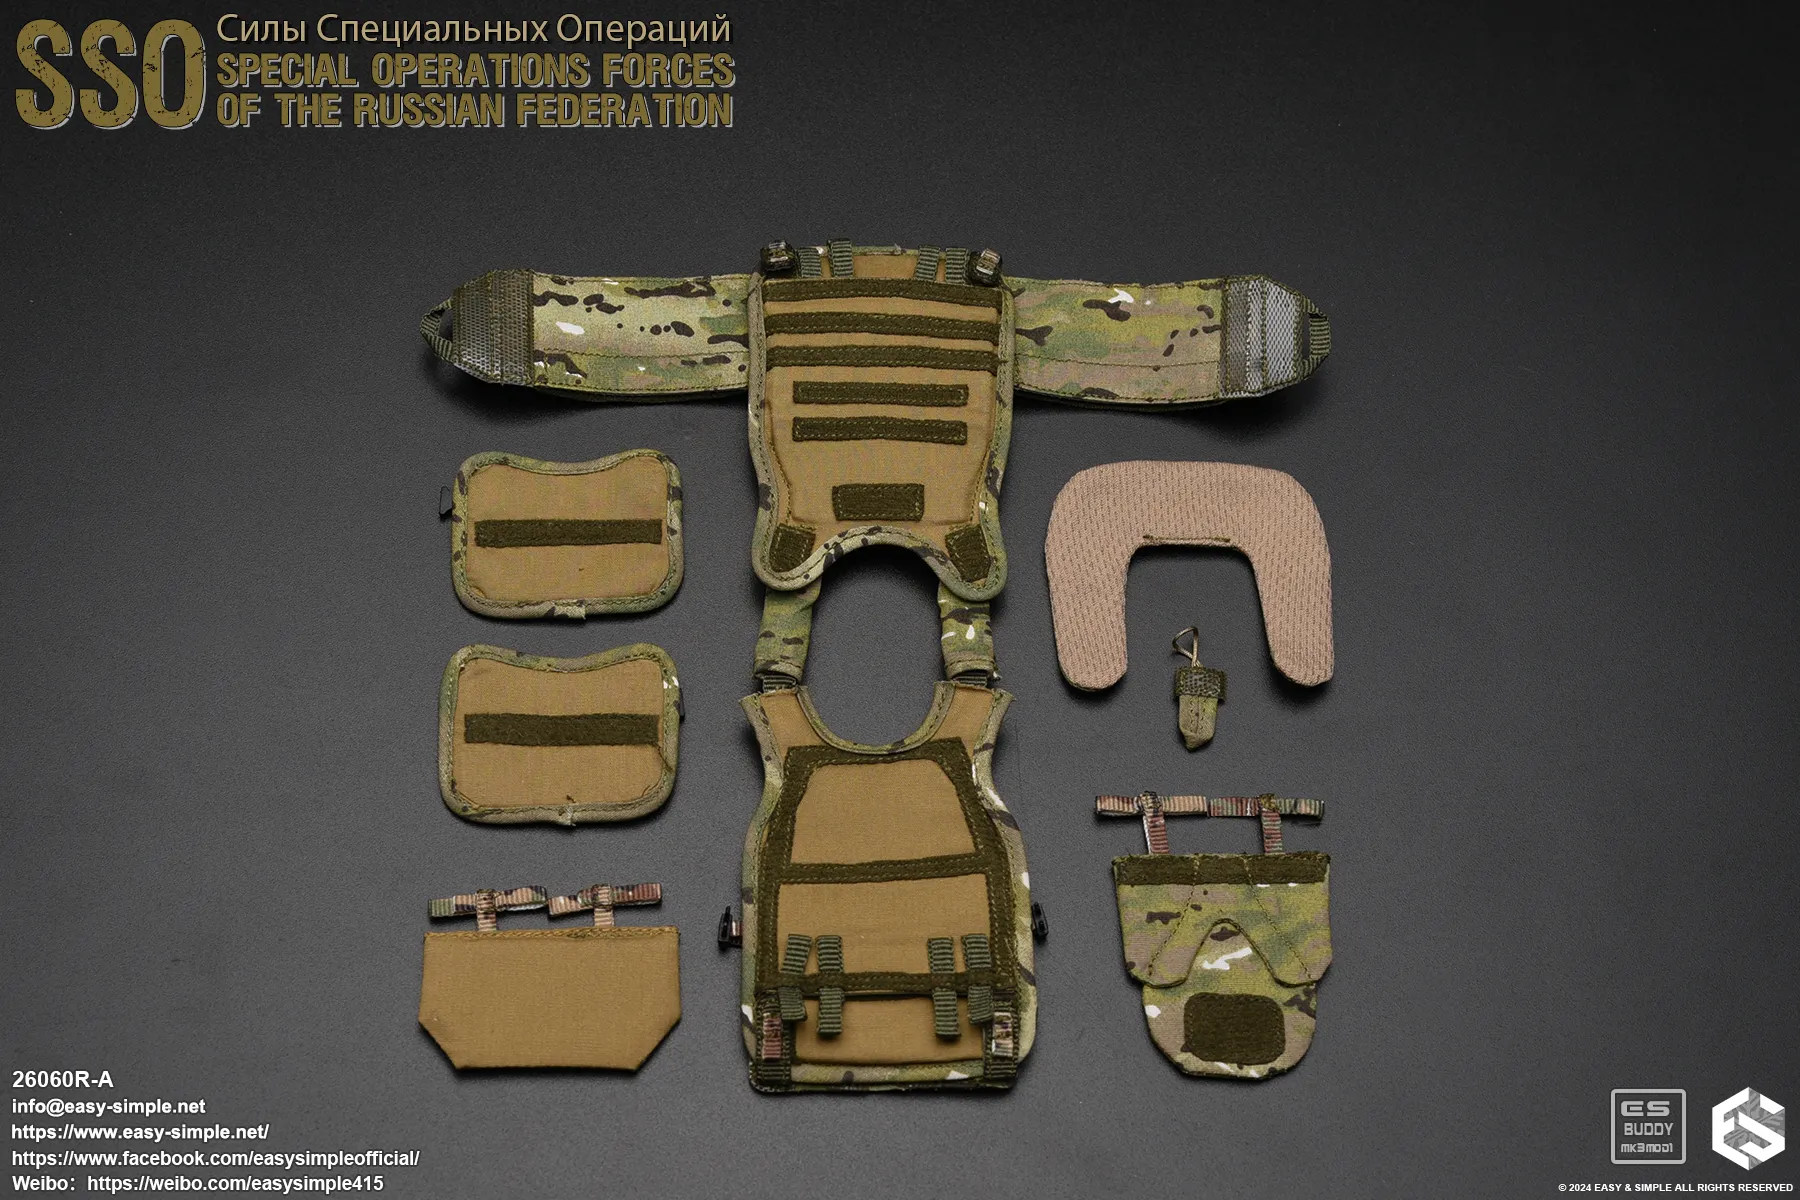 male - NEW PRODUCT: Easy&Simple 26060R-A Russian Special Operations Forces (SSO) Format,webp